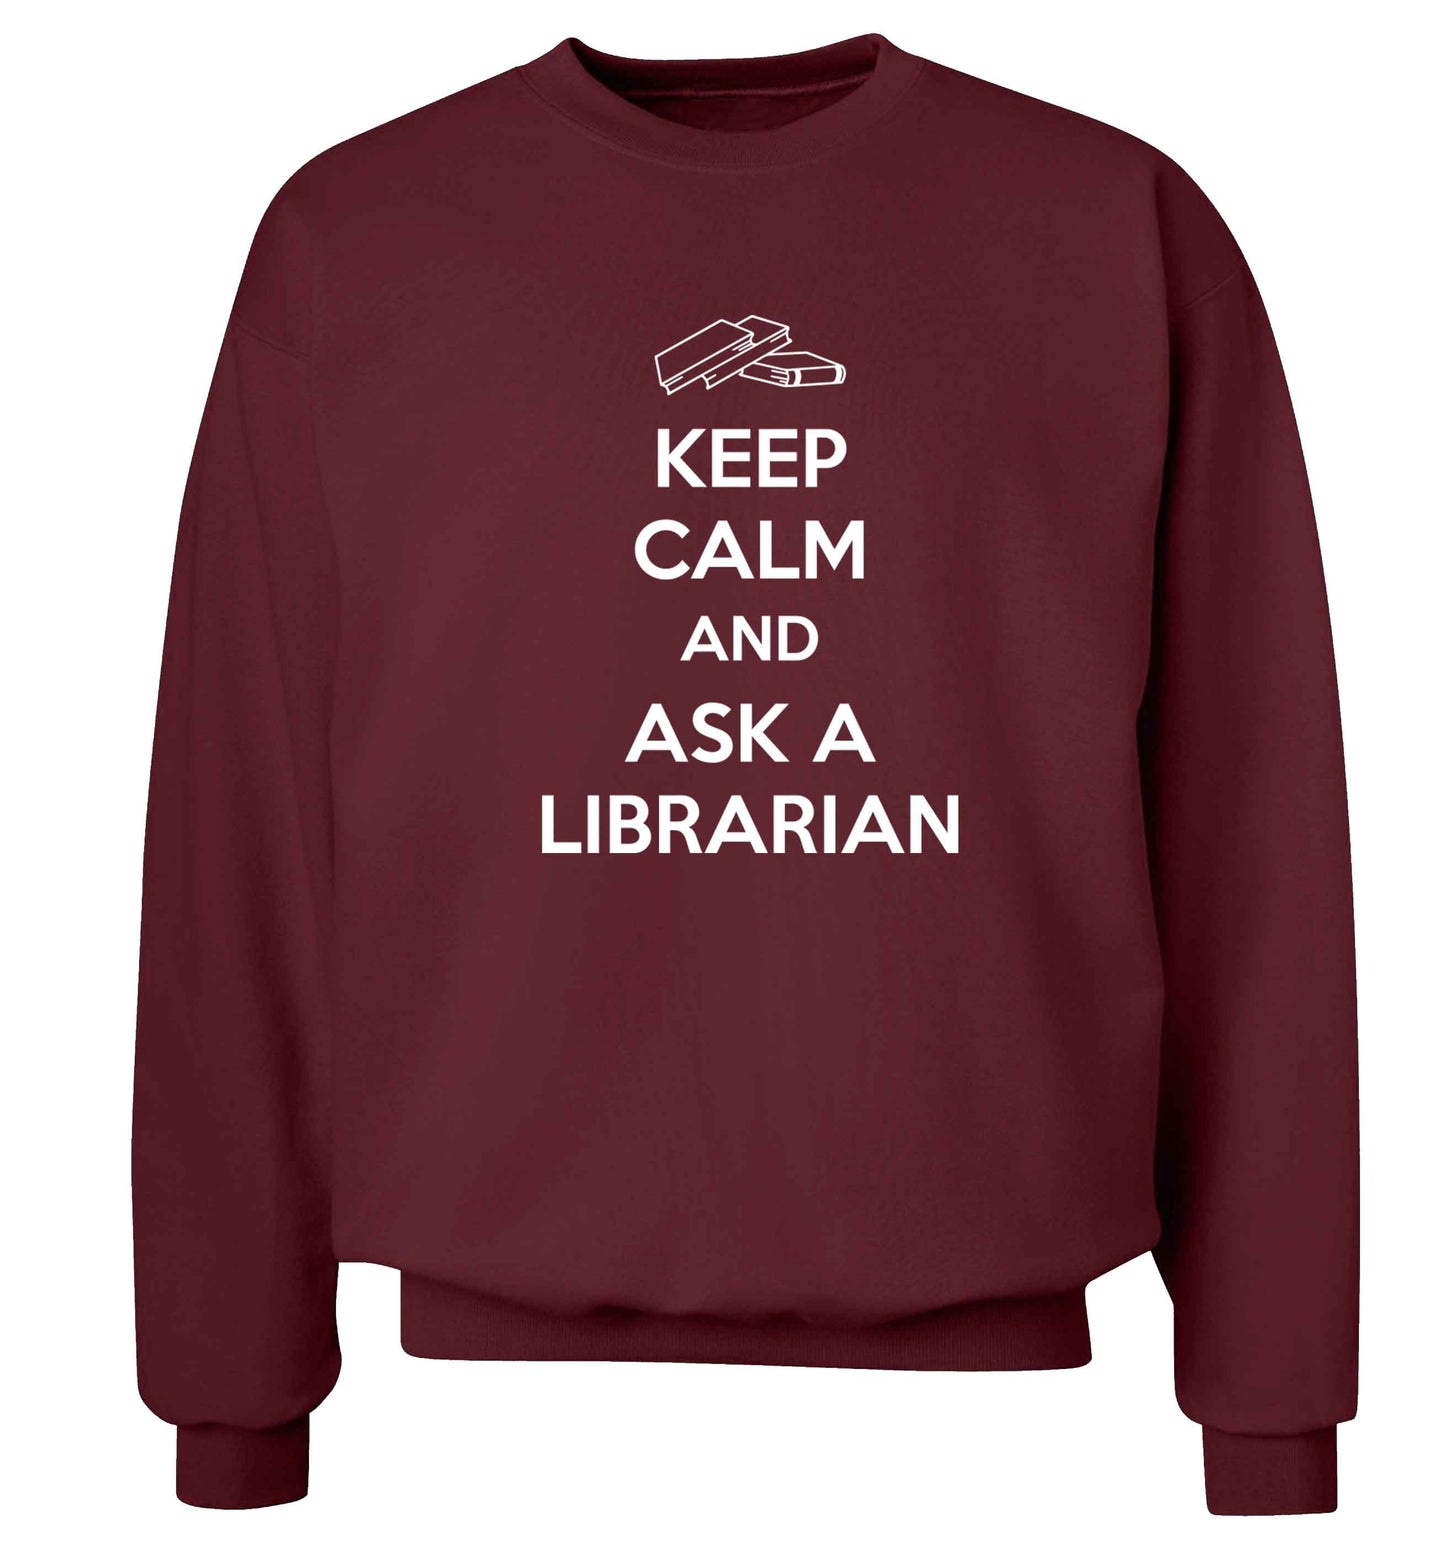 Keep calm and ask a librarian Adult's unisex maroon Sweater 2XL